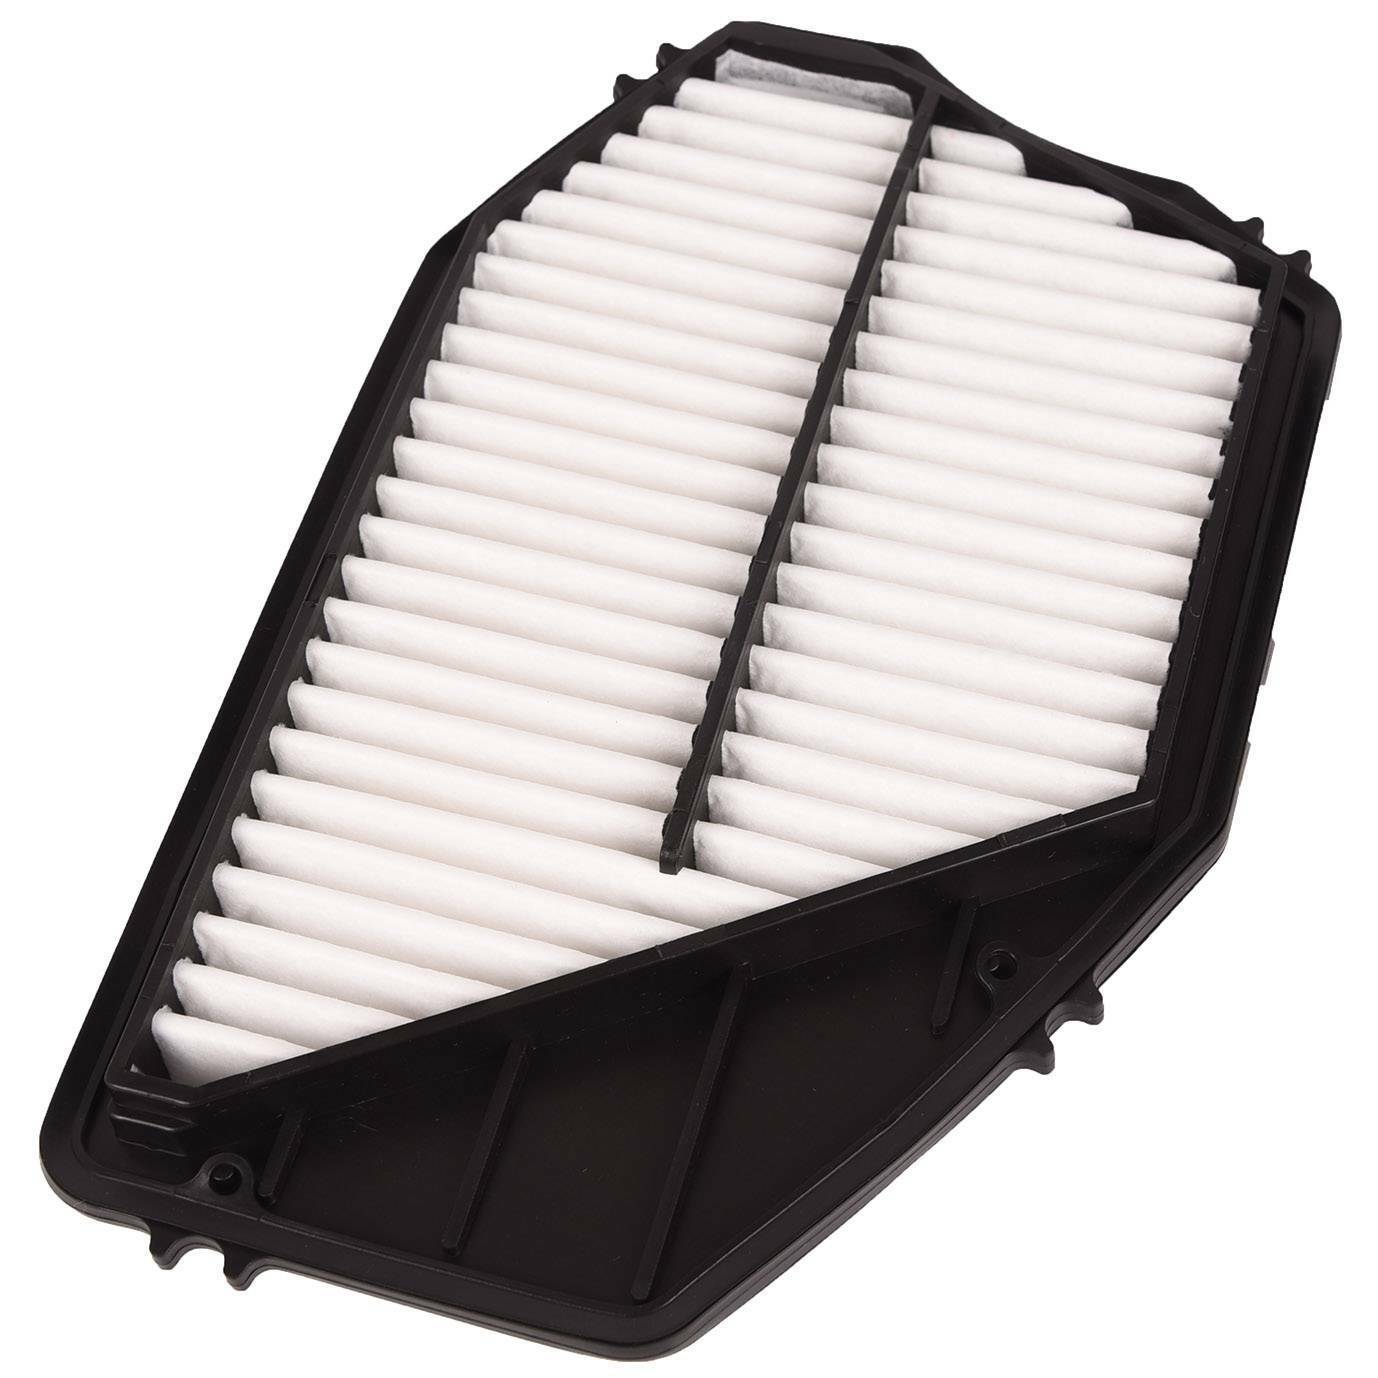 Engine Air Filter Fits Honda Accord 94-97 Odyssey 95-98 Oasis 96-99 CL 97-99